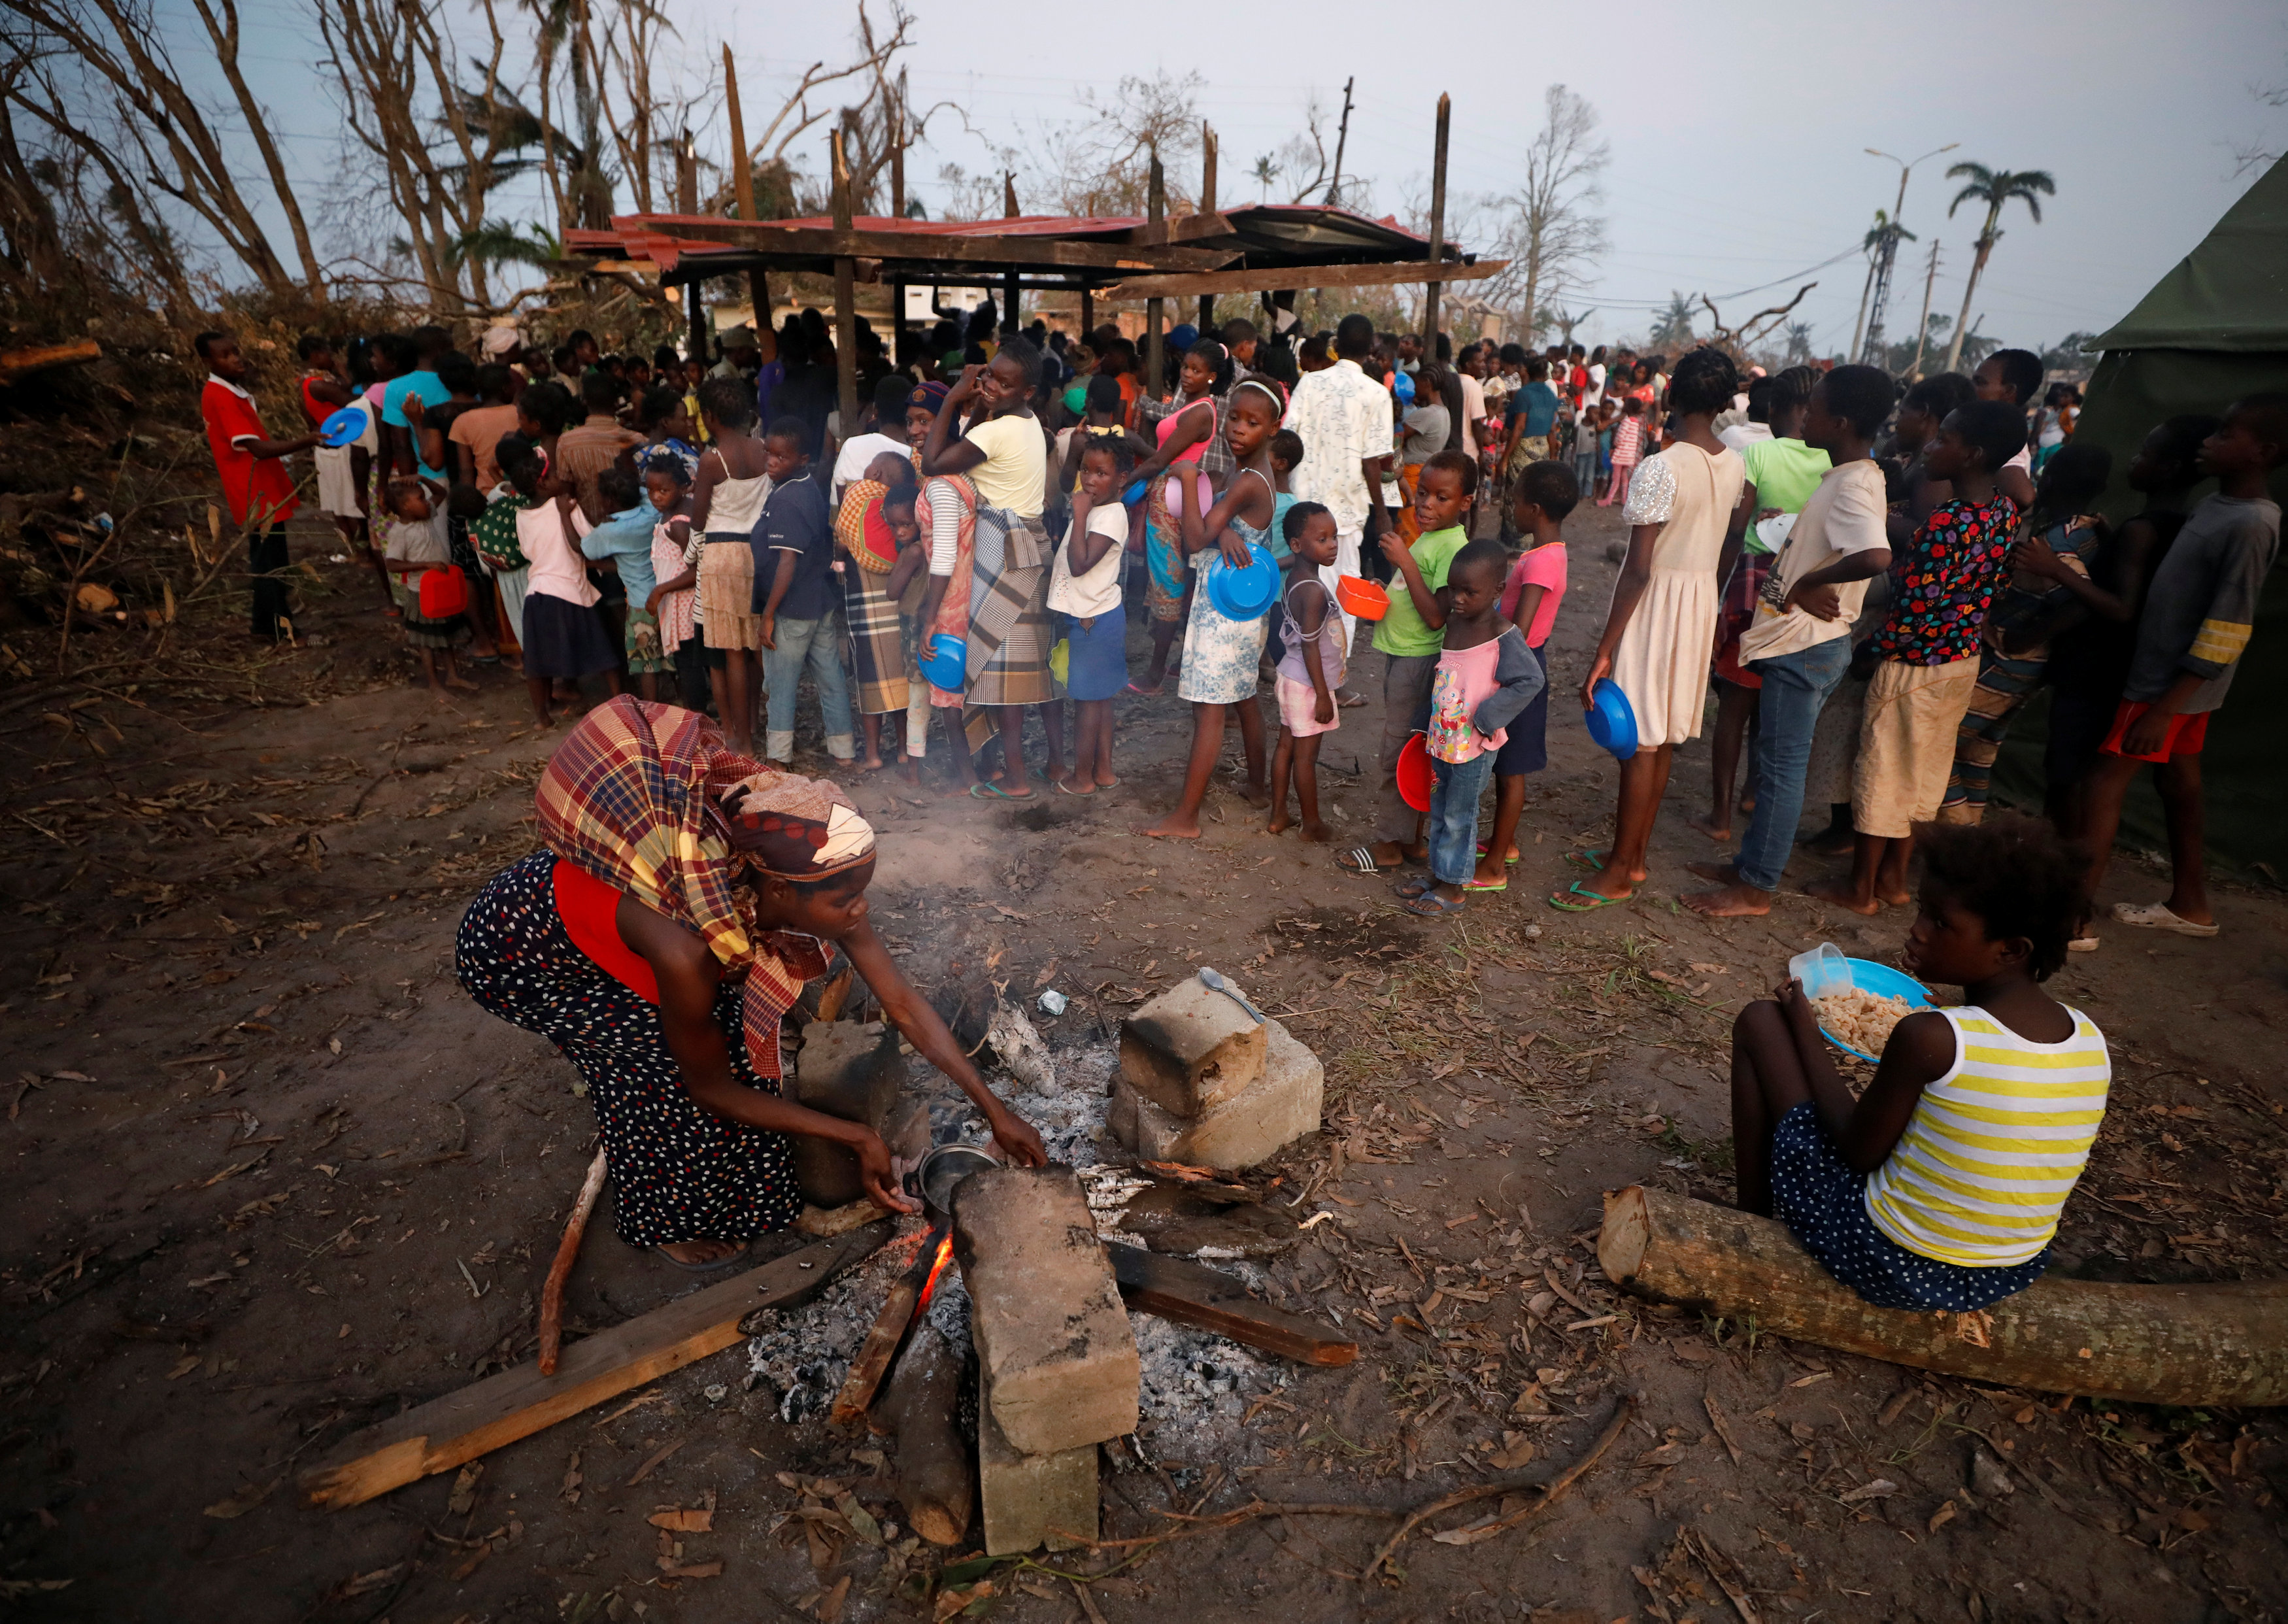 People wait for food aid in the aftermath of Cyclone Idai